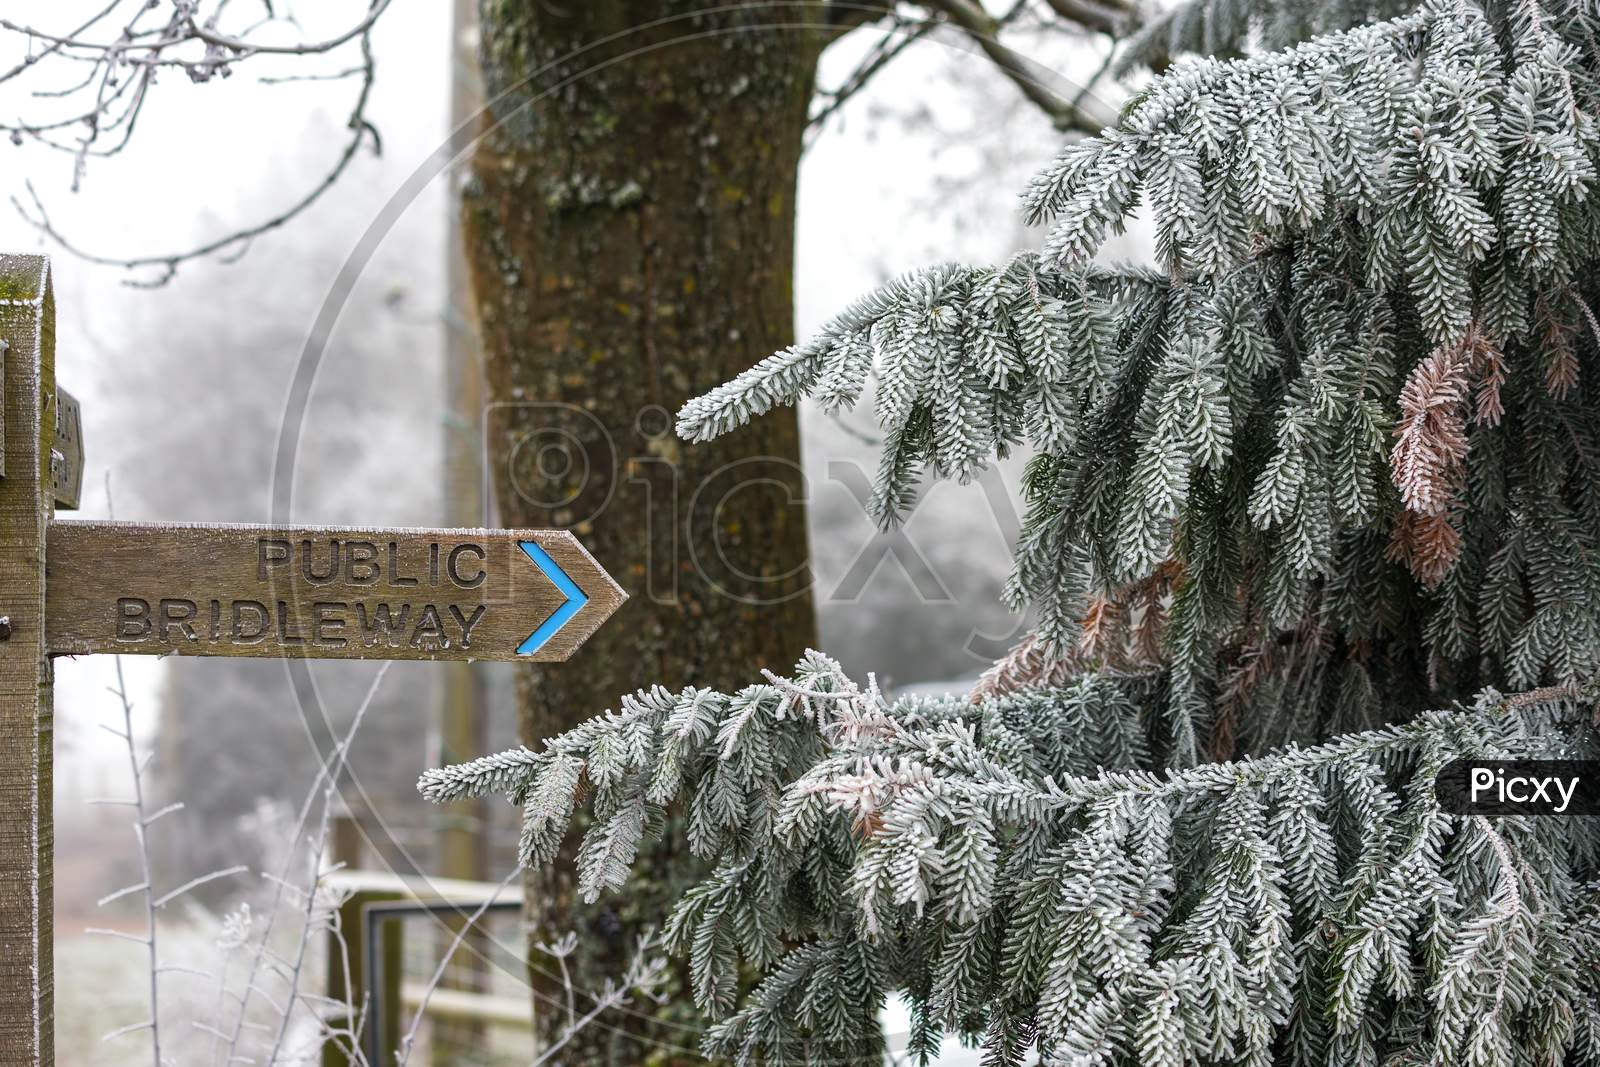 Pine Tree Covered With Hoar Frost Pointing To A Public Bridelway Signpost